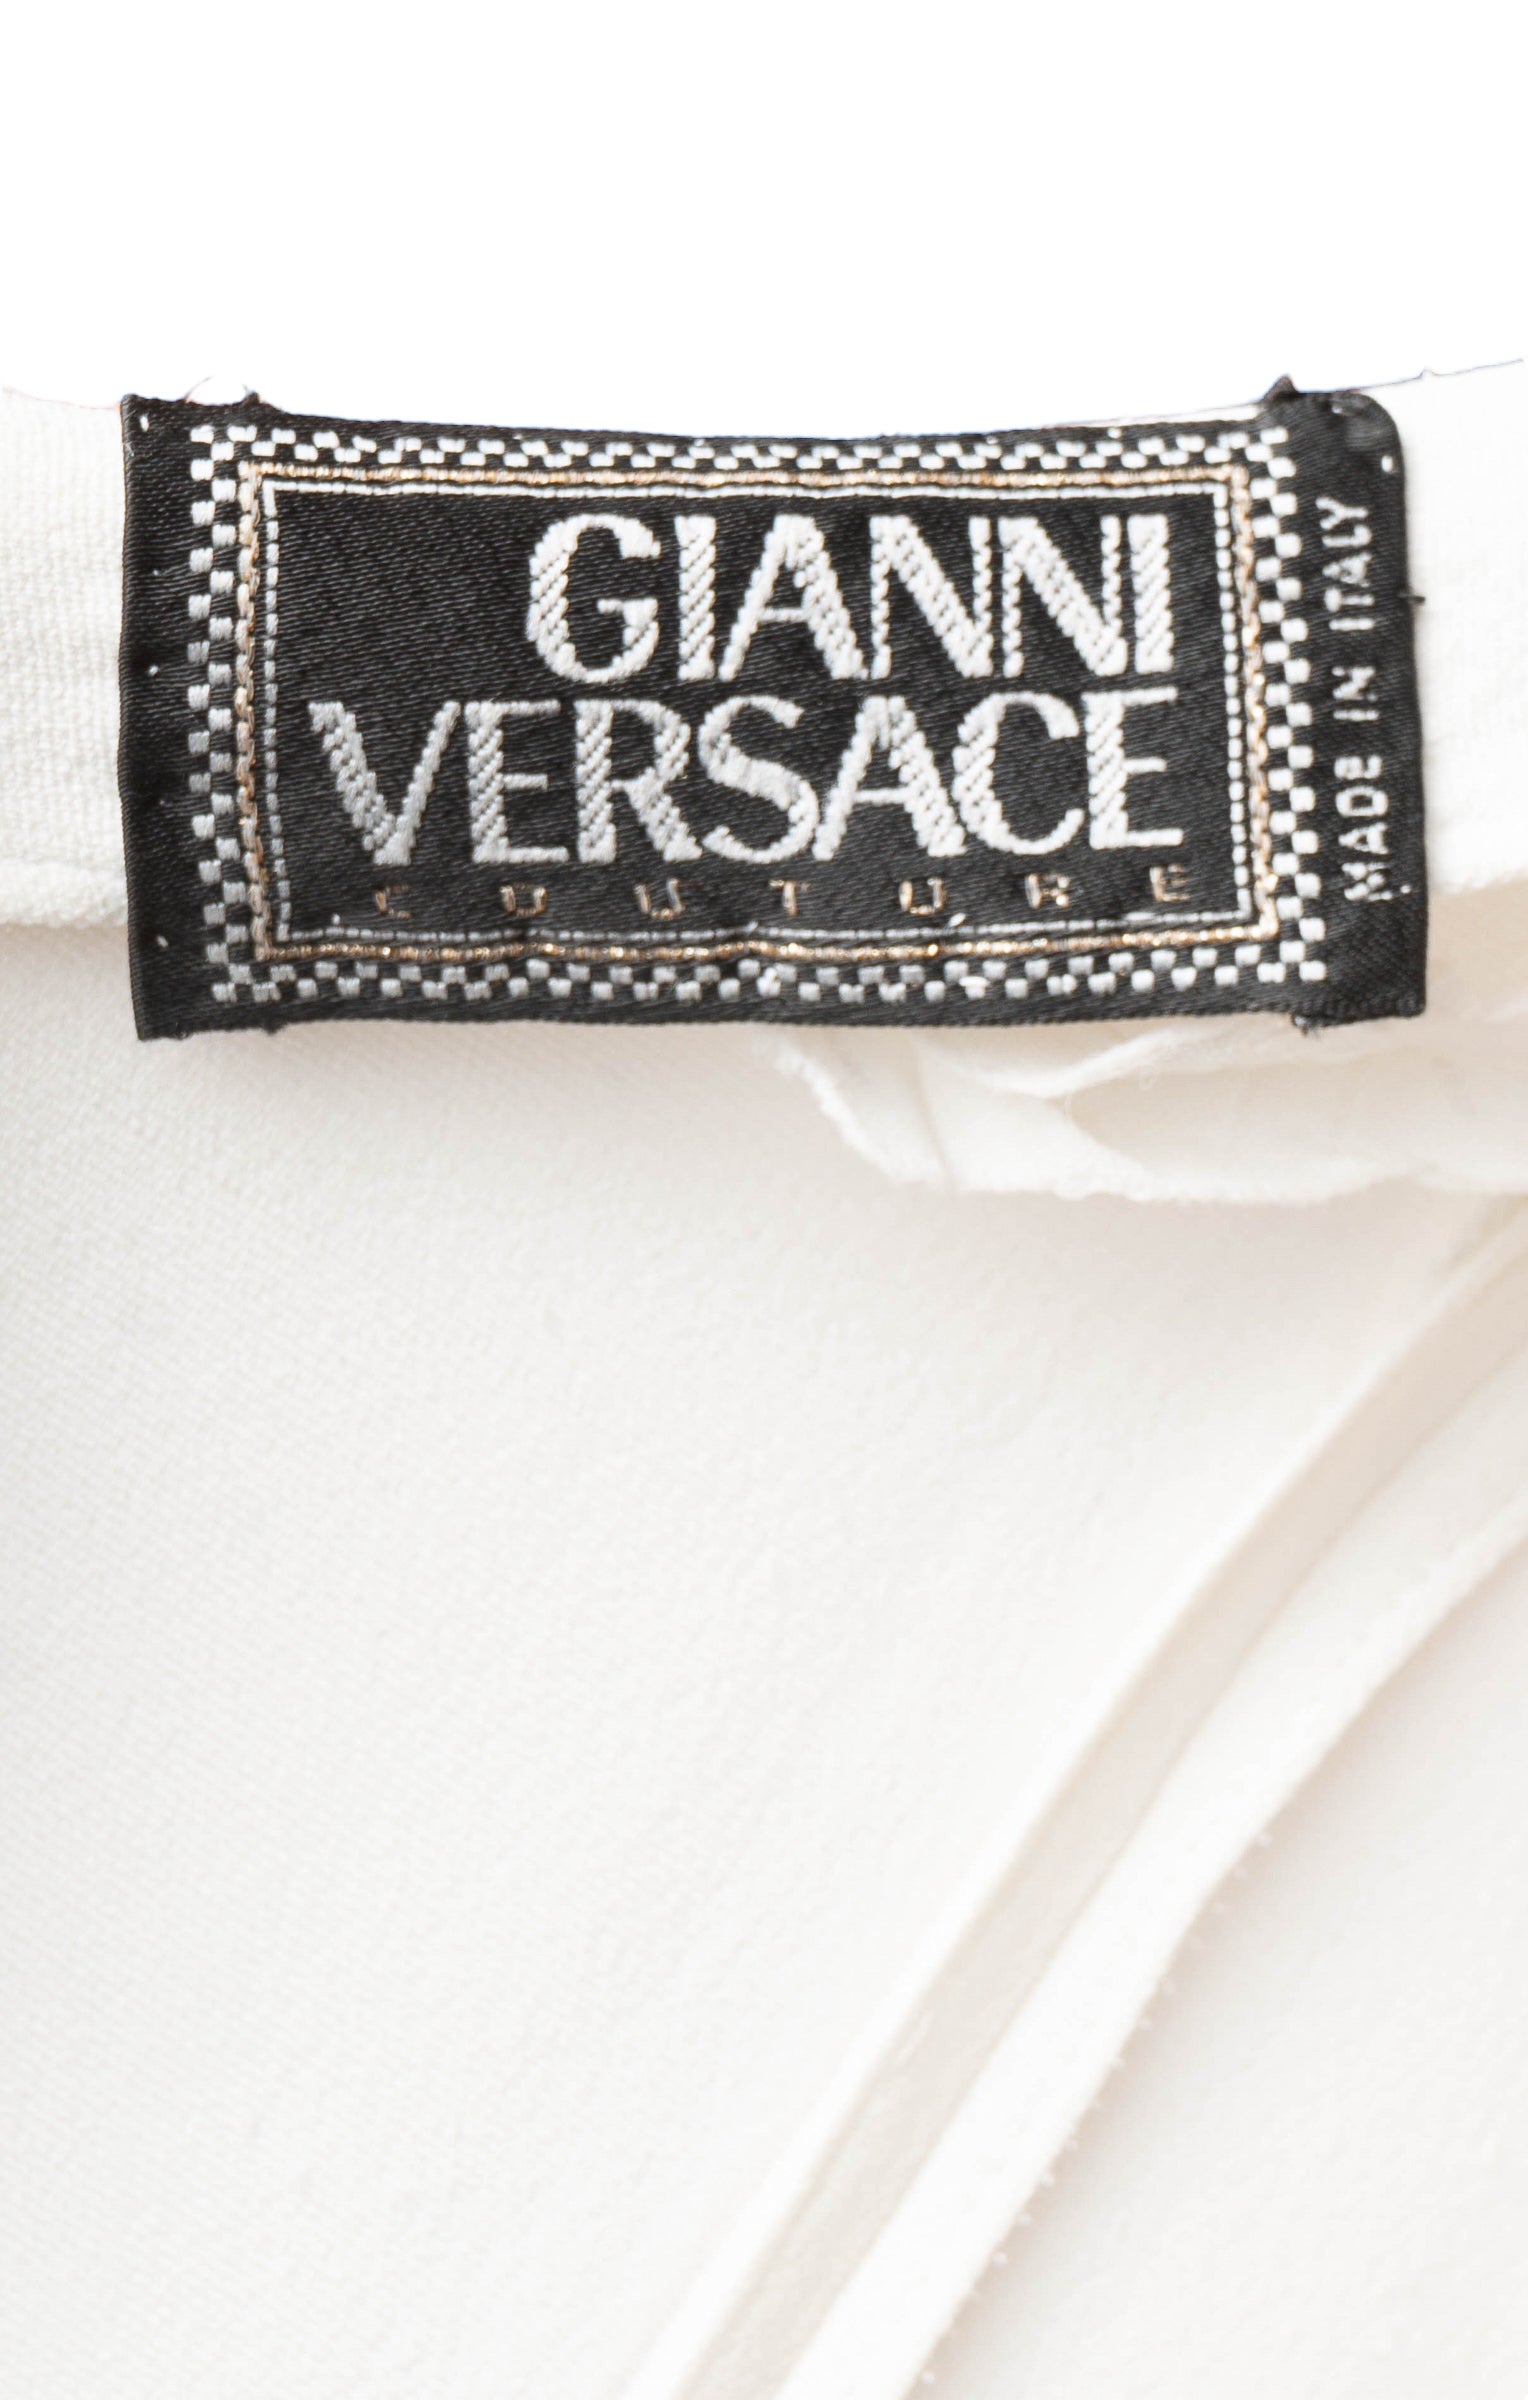 VINTAGE GIANNI VERSACE (RARE) Dress Size: IT 42 / Altered to fit like US 2-4